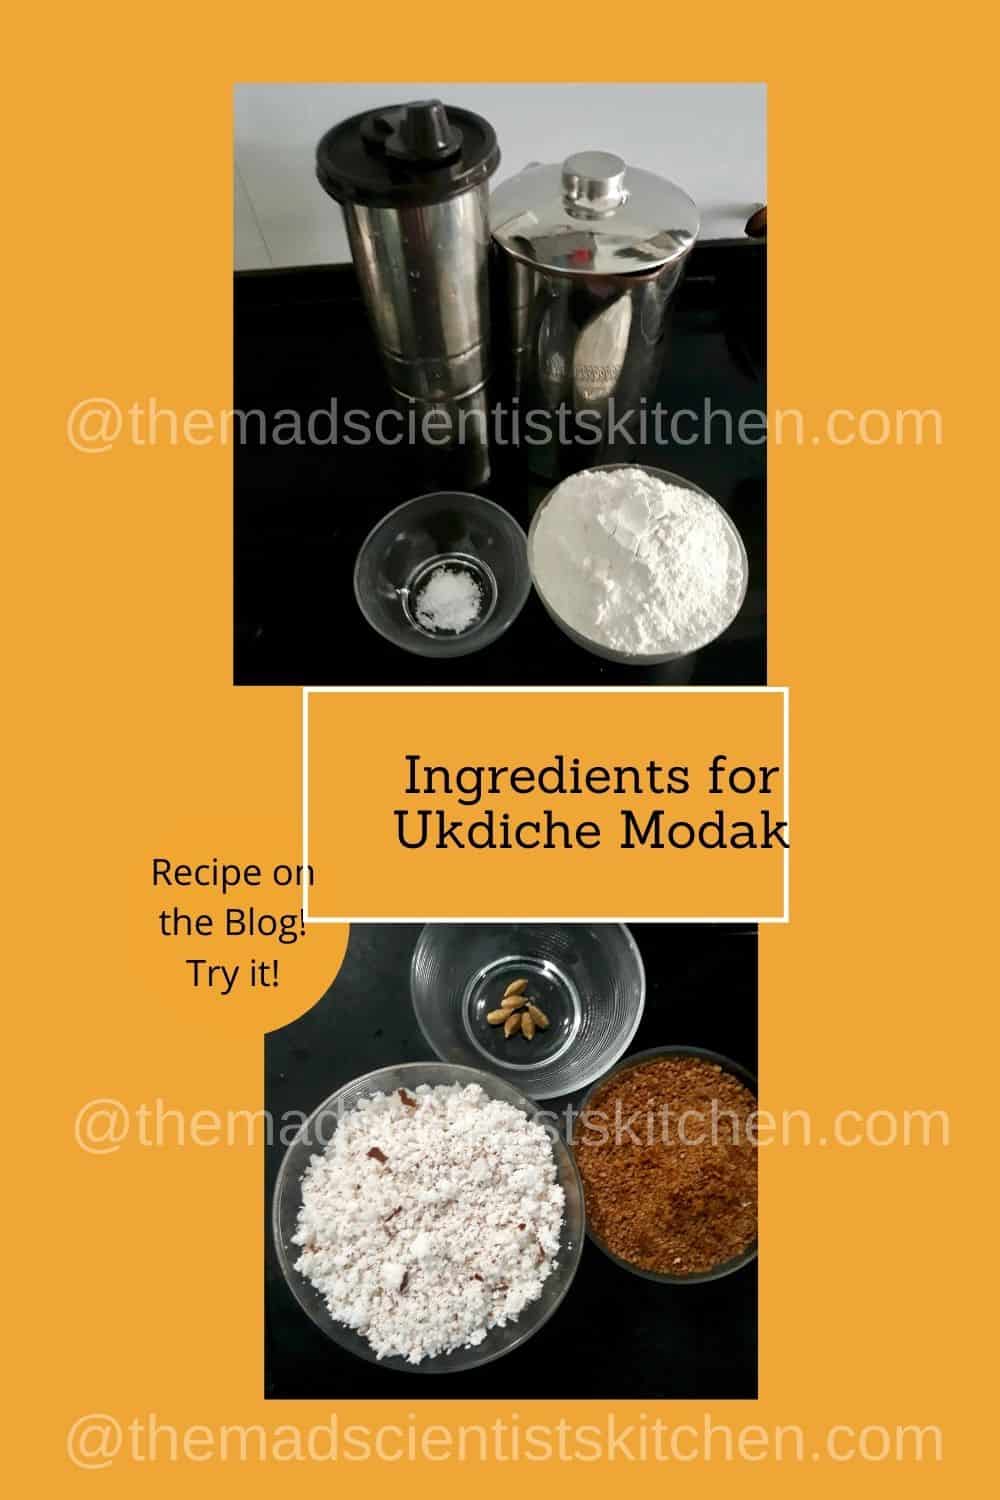 To make ukadiche Modak these are your ingredients